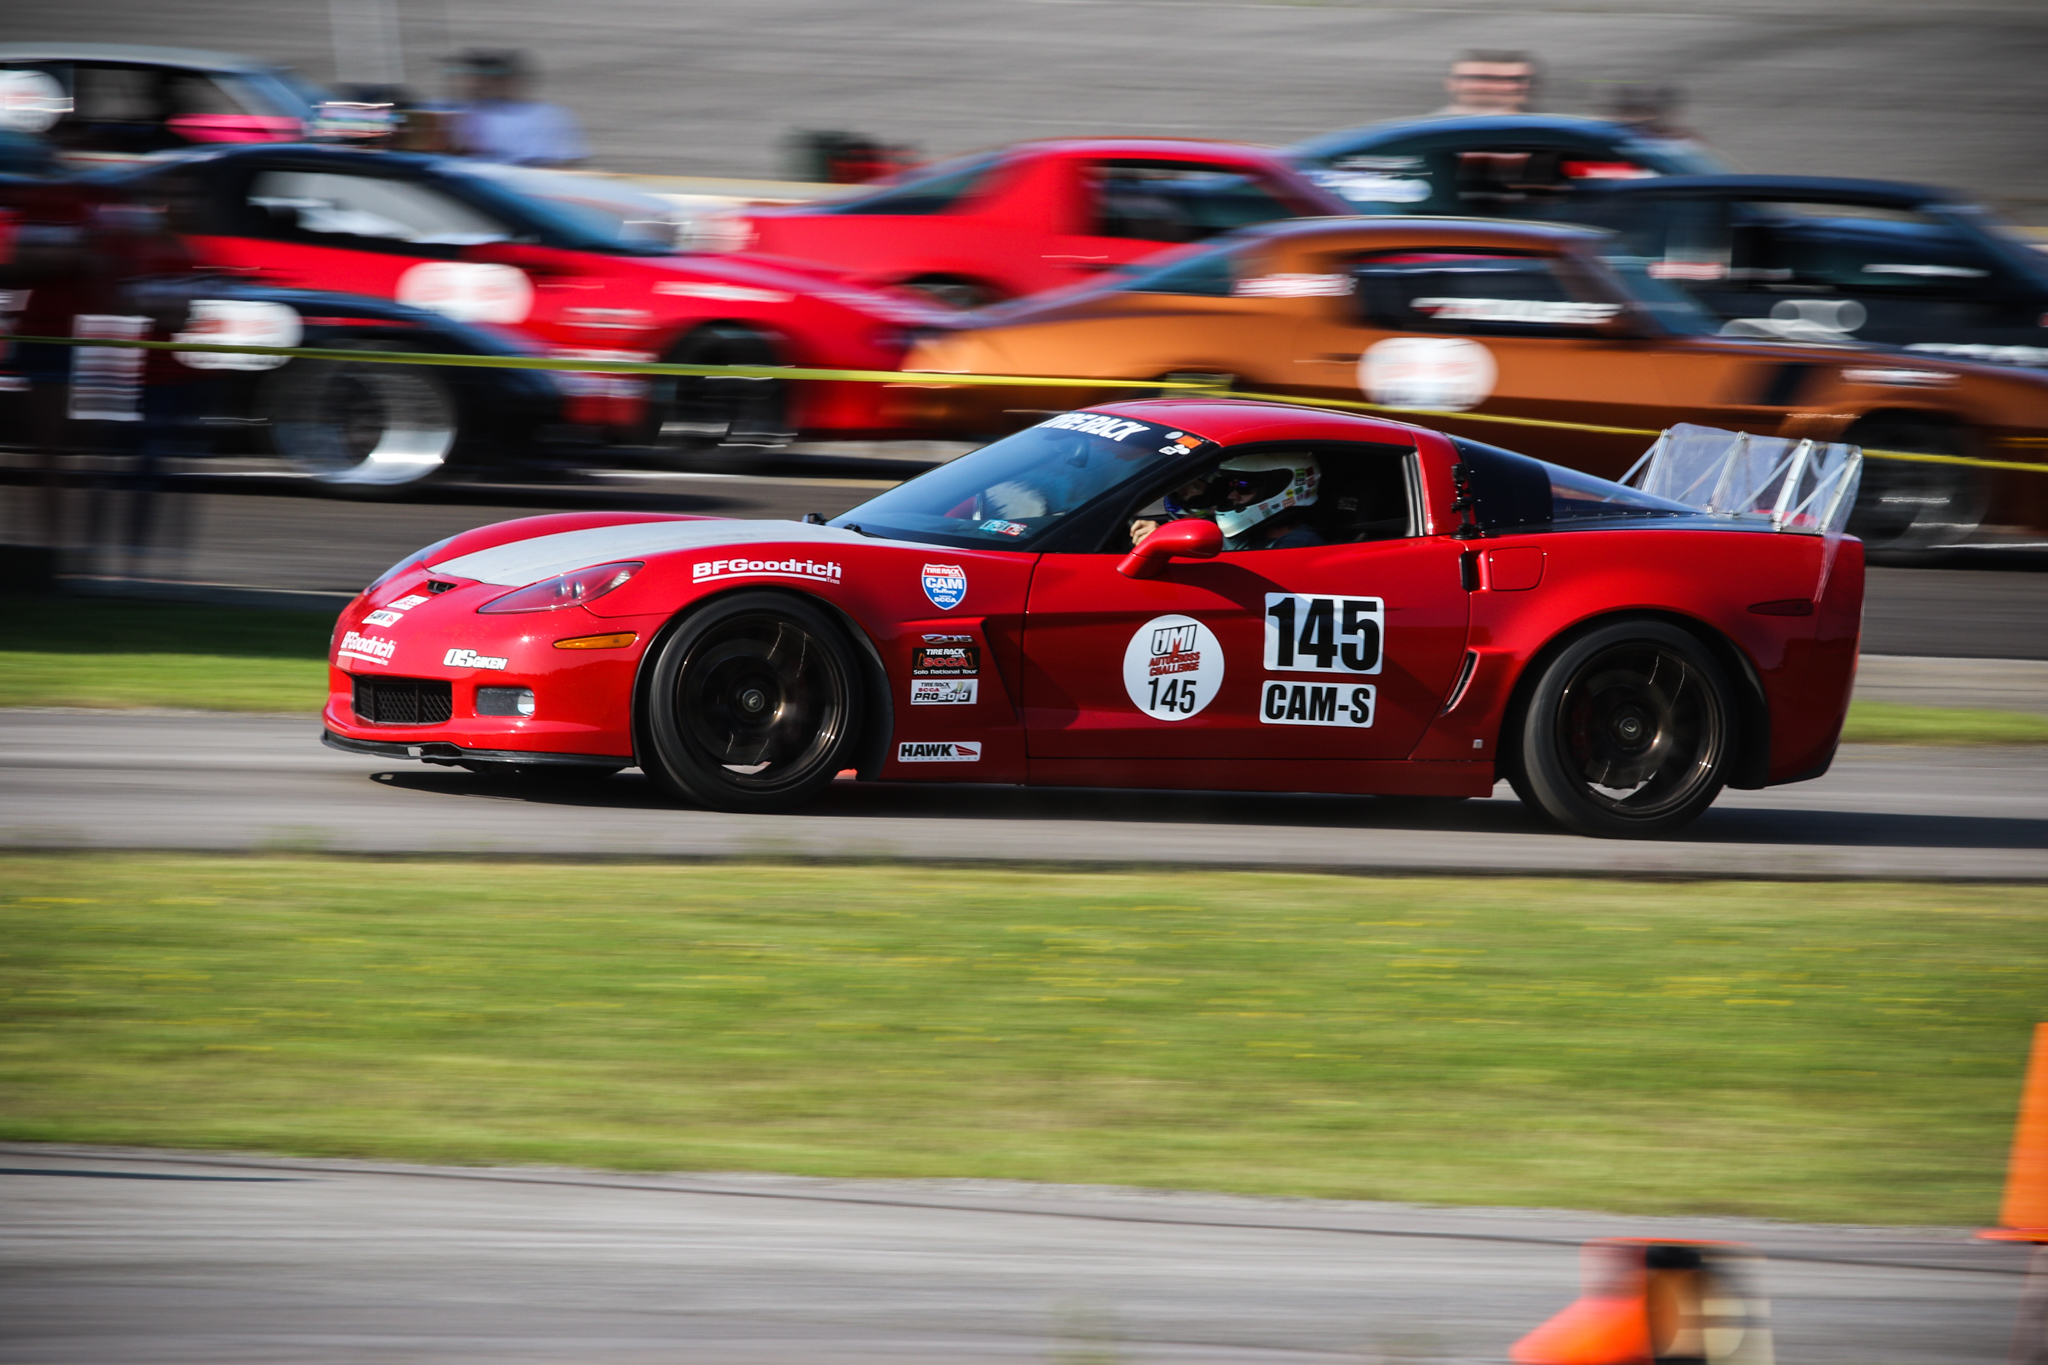 Manheim, Pa.’s Justin Peachey wheels his 2007 Corvette to the overall win at the 2019 UMI Autocross Challenge. (Provided photo)